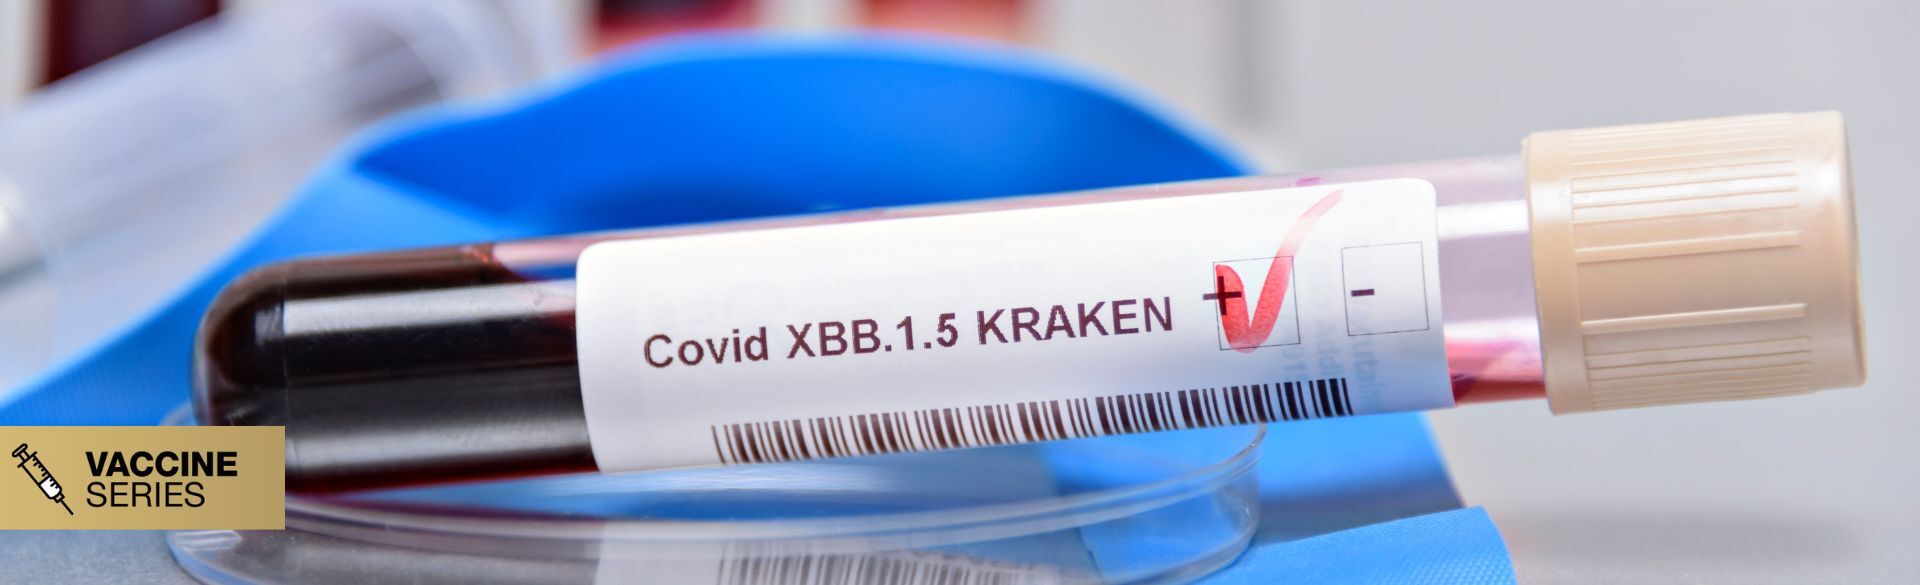 XBB.1.5: What you need to know about COVID-19's 'Kraken' variant